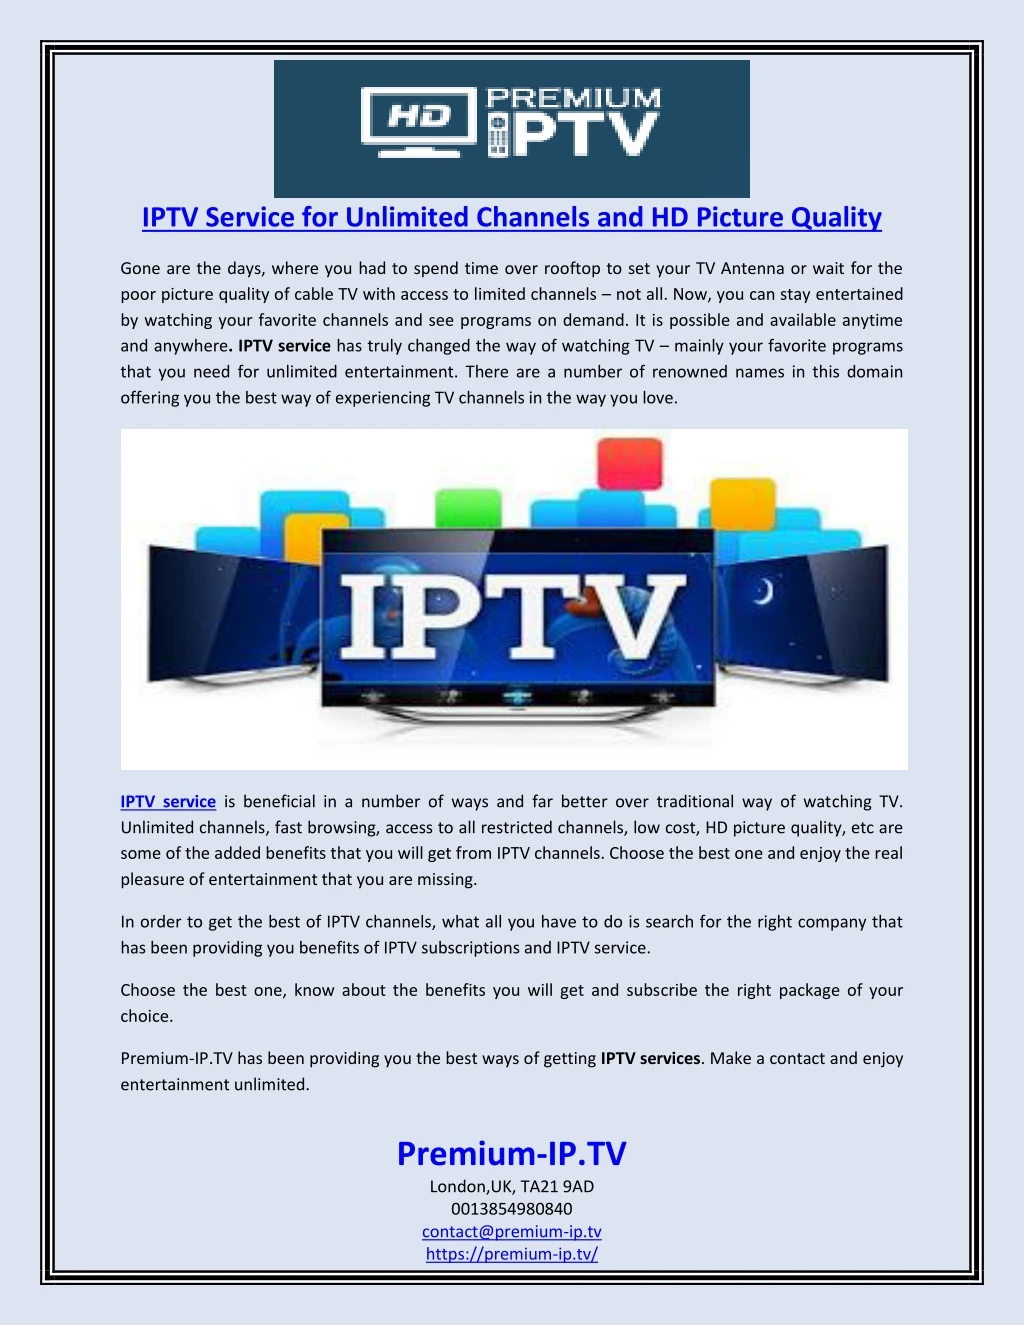 iptv service for unlimited channels